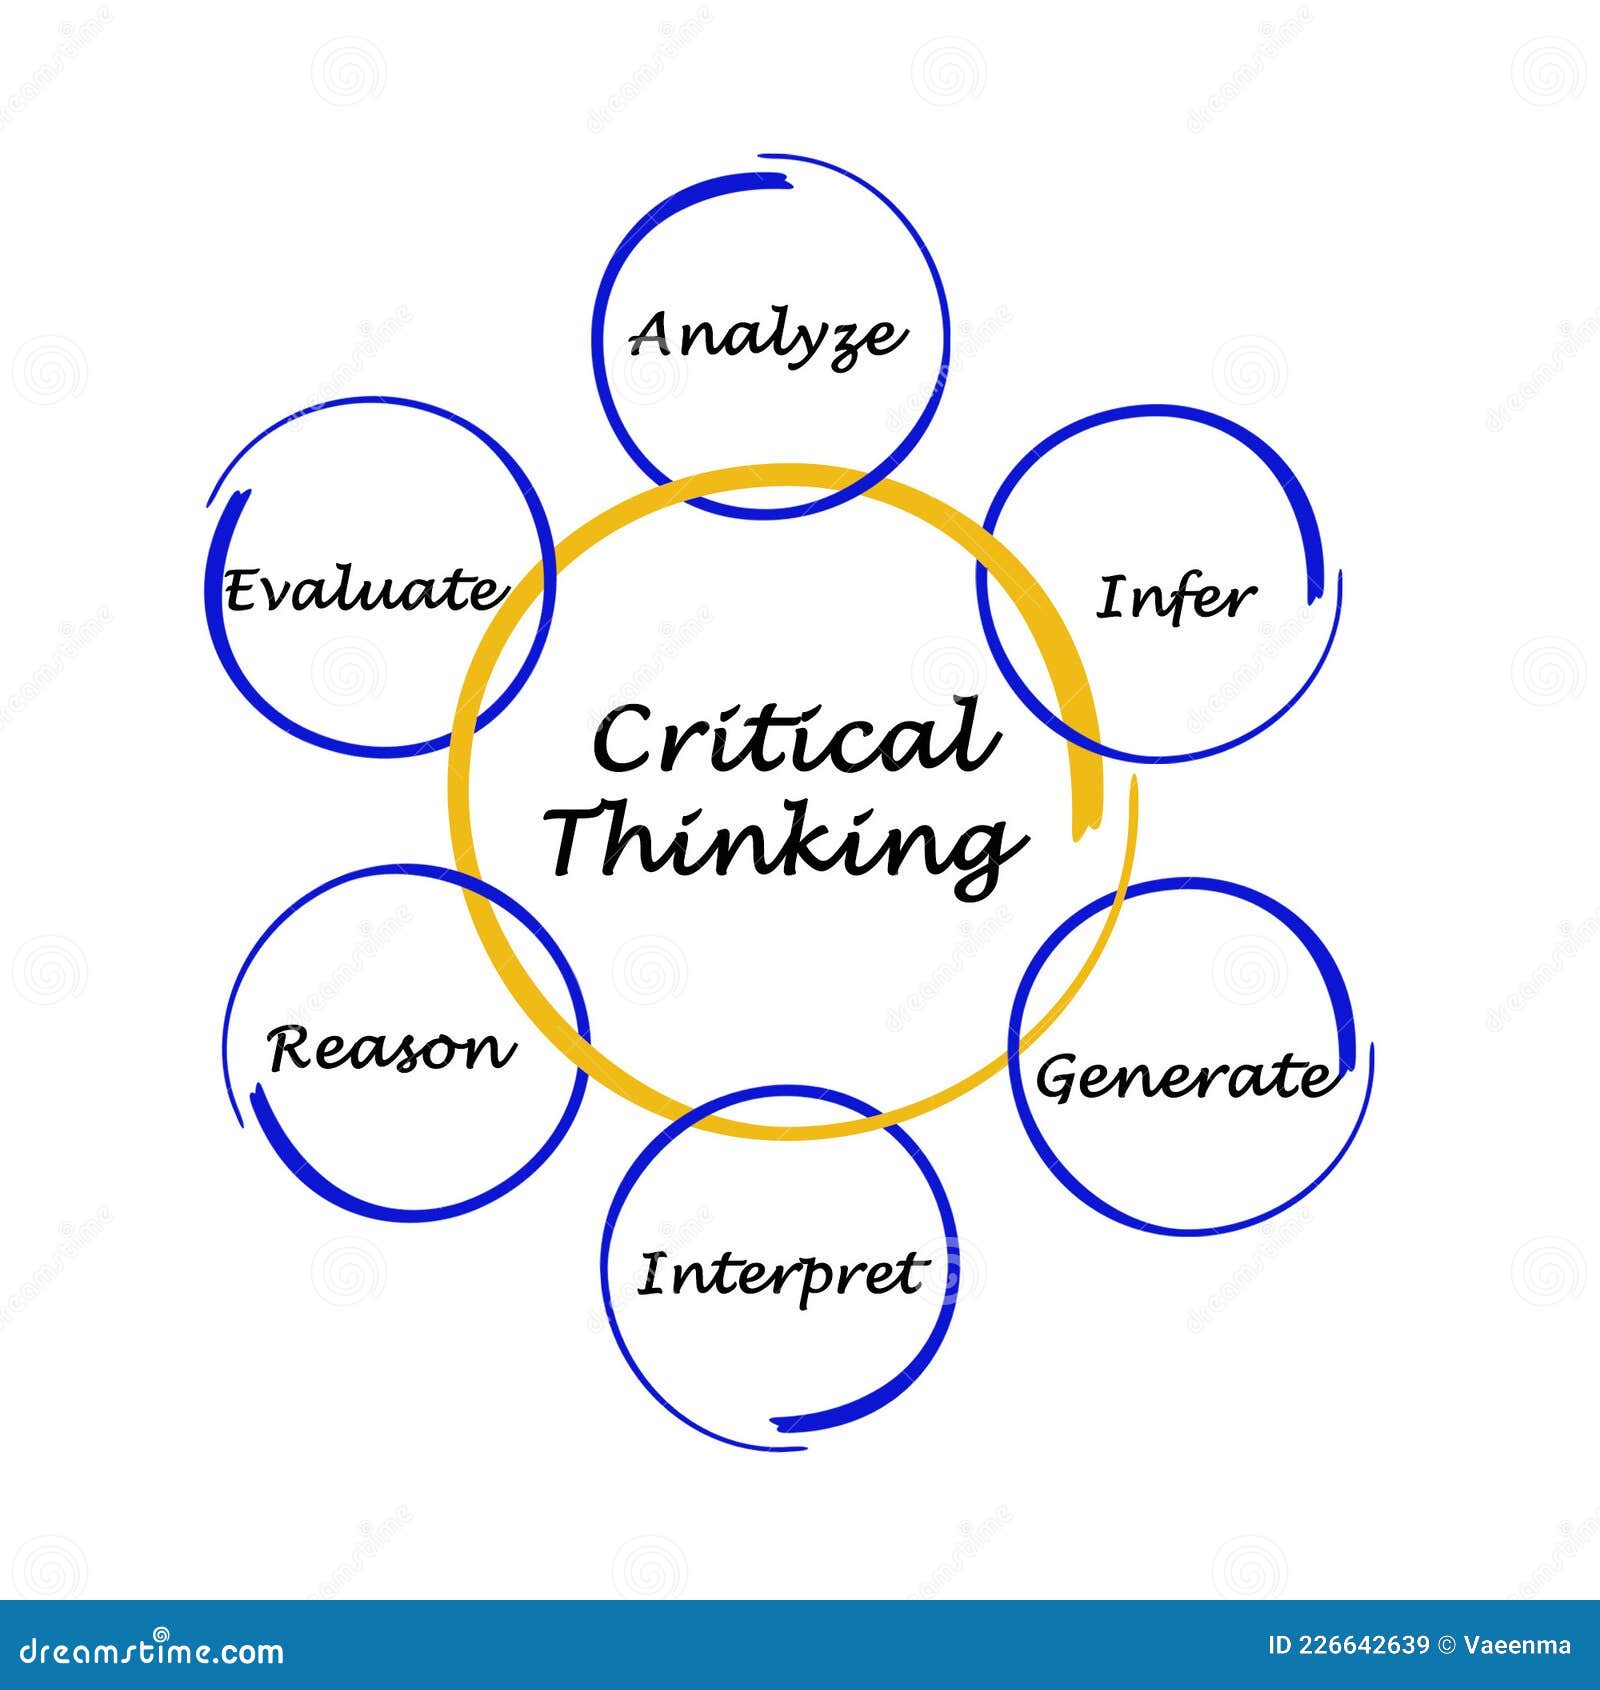 what is not a component of critical thinking